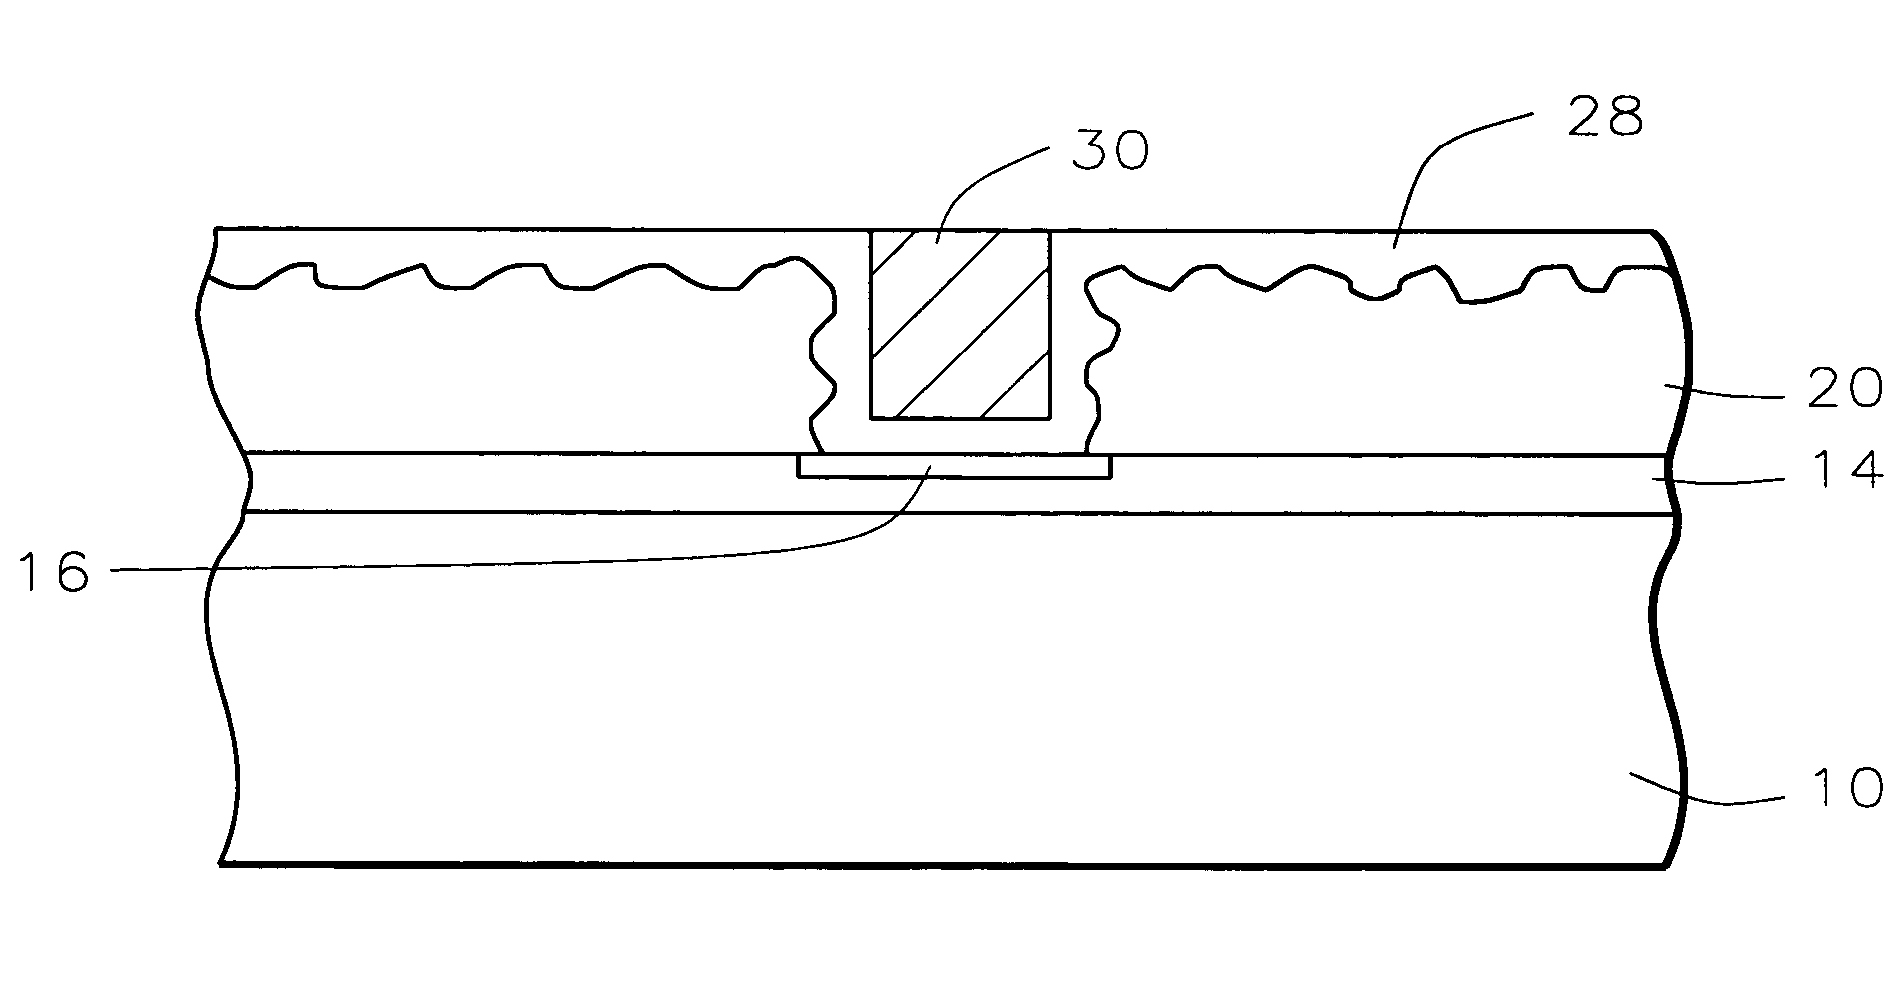 Device structure having enhanced surface adhesion and failure mode analysis